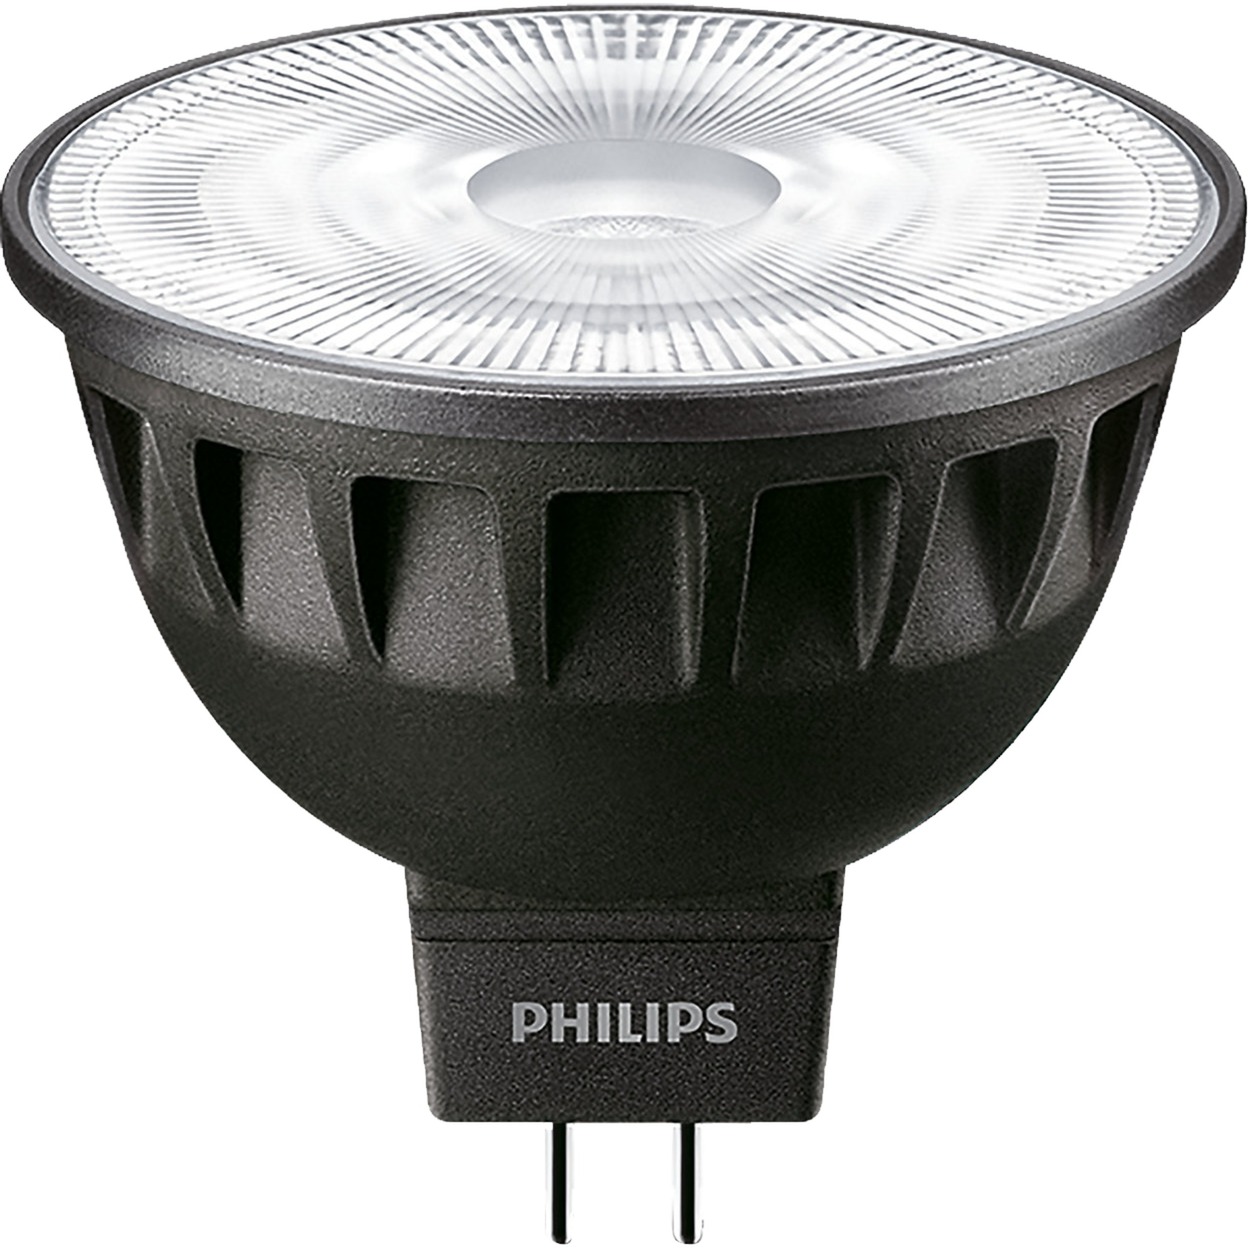 Master LED ExpertColor lampa LED Bia?y 6,5 W GU5.3 A+